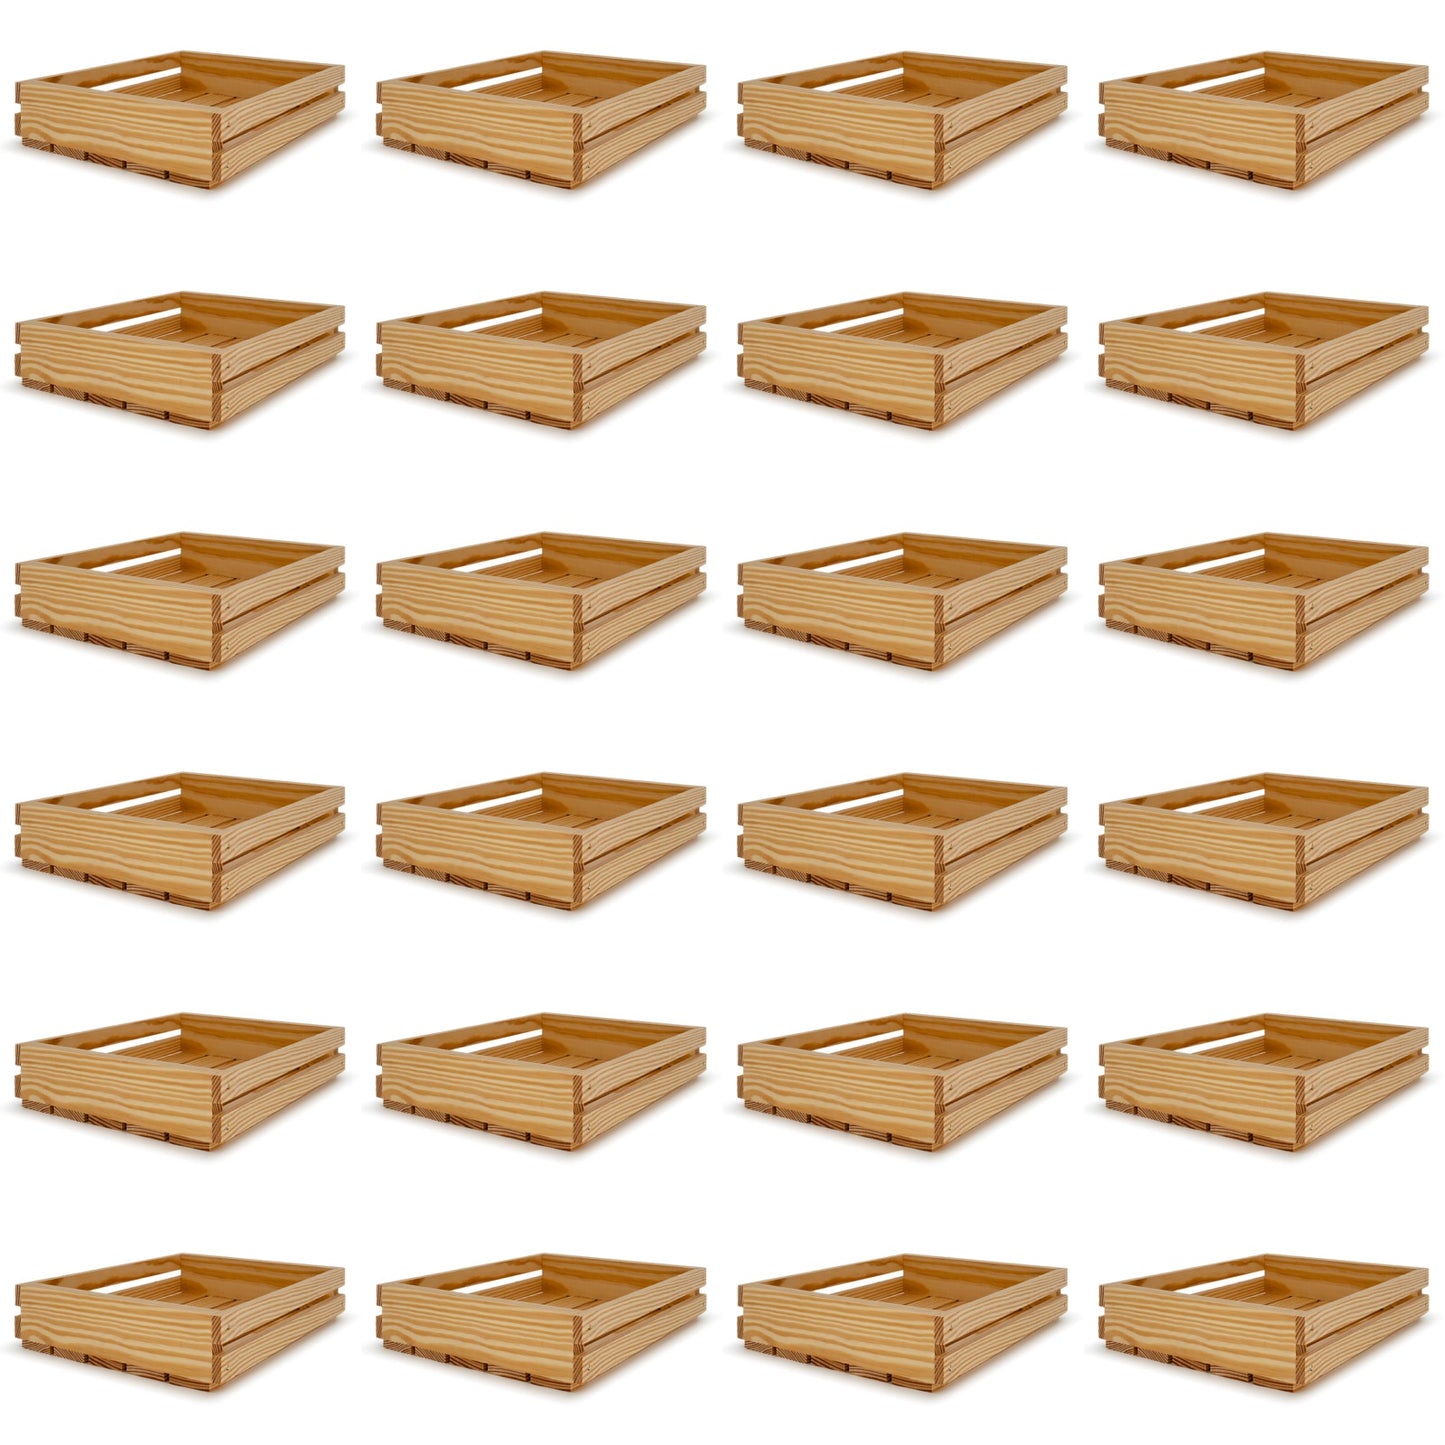 24 Small wooden crates 12x10x2.5